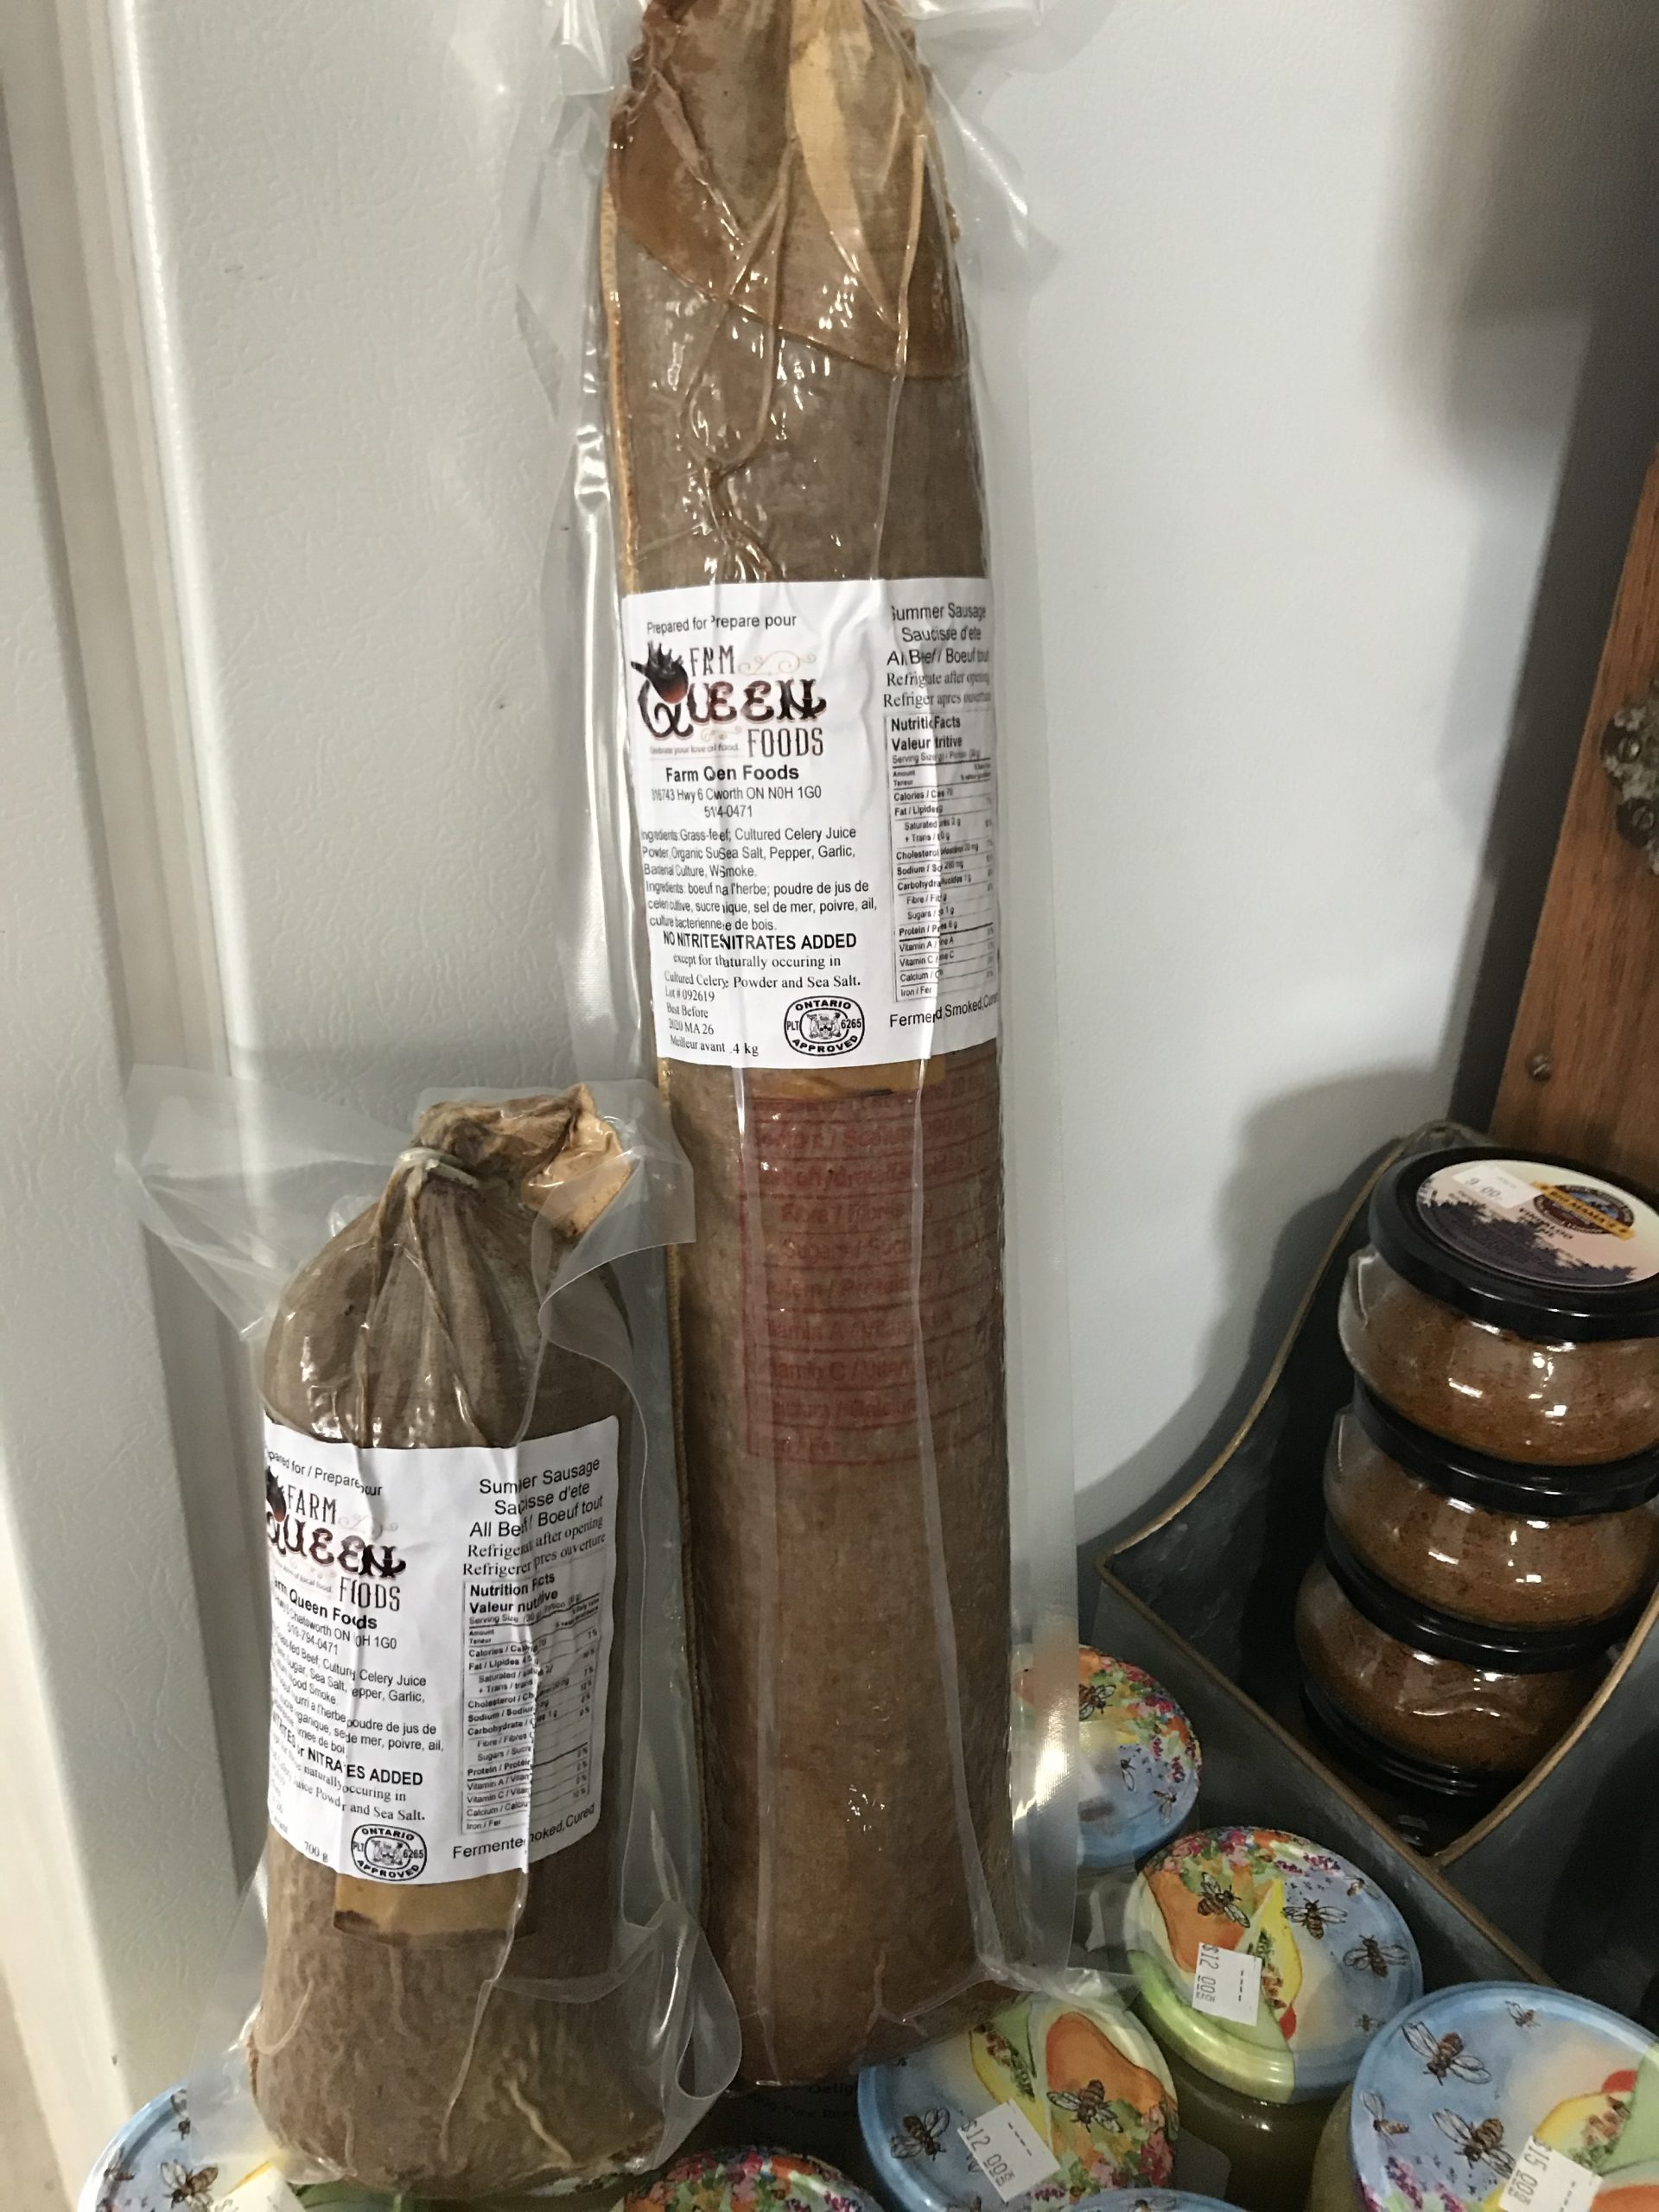 FULL SLEEVE - Summer Sausage - Grass-fed Beef